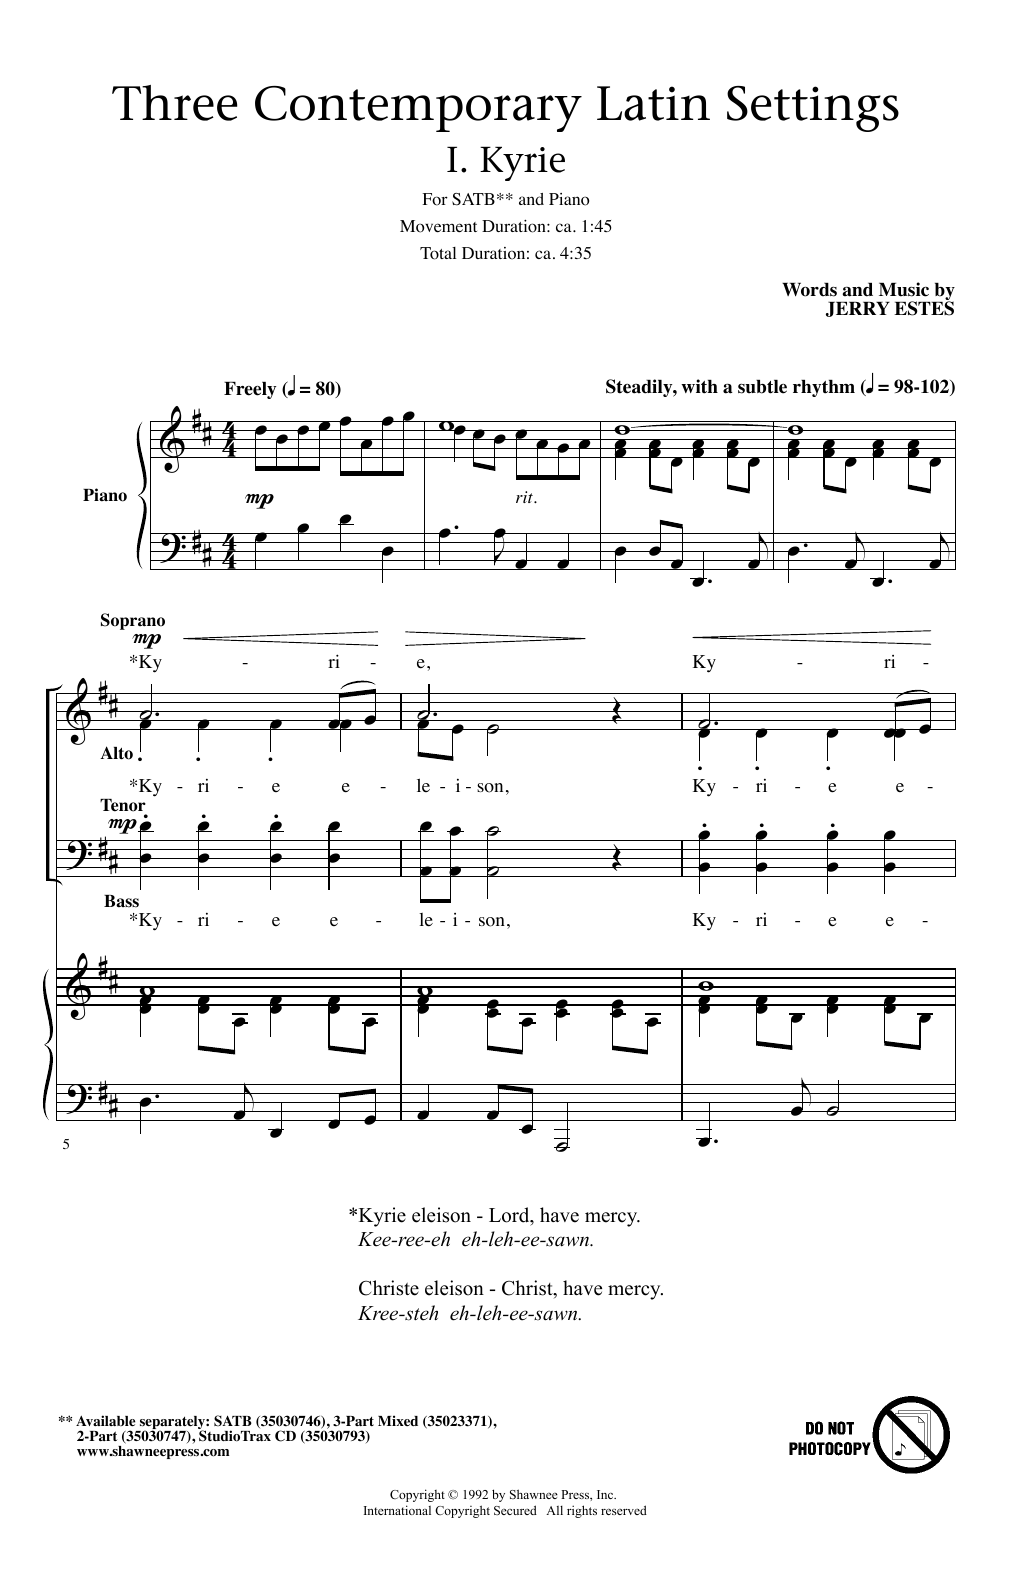 Download Jerry Estes Three Contemporary Latin Settings Sheet Music